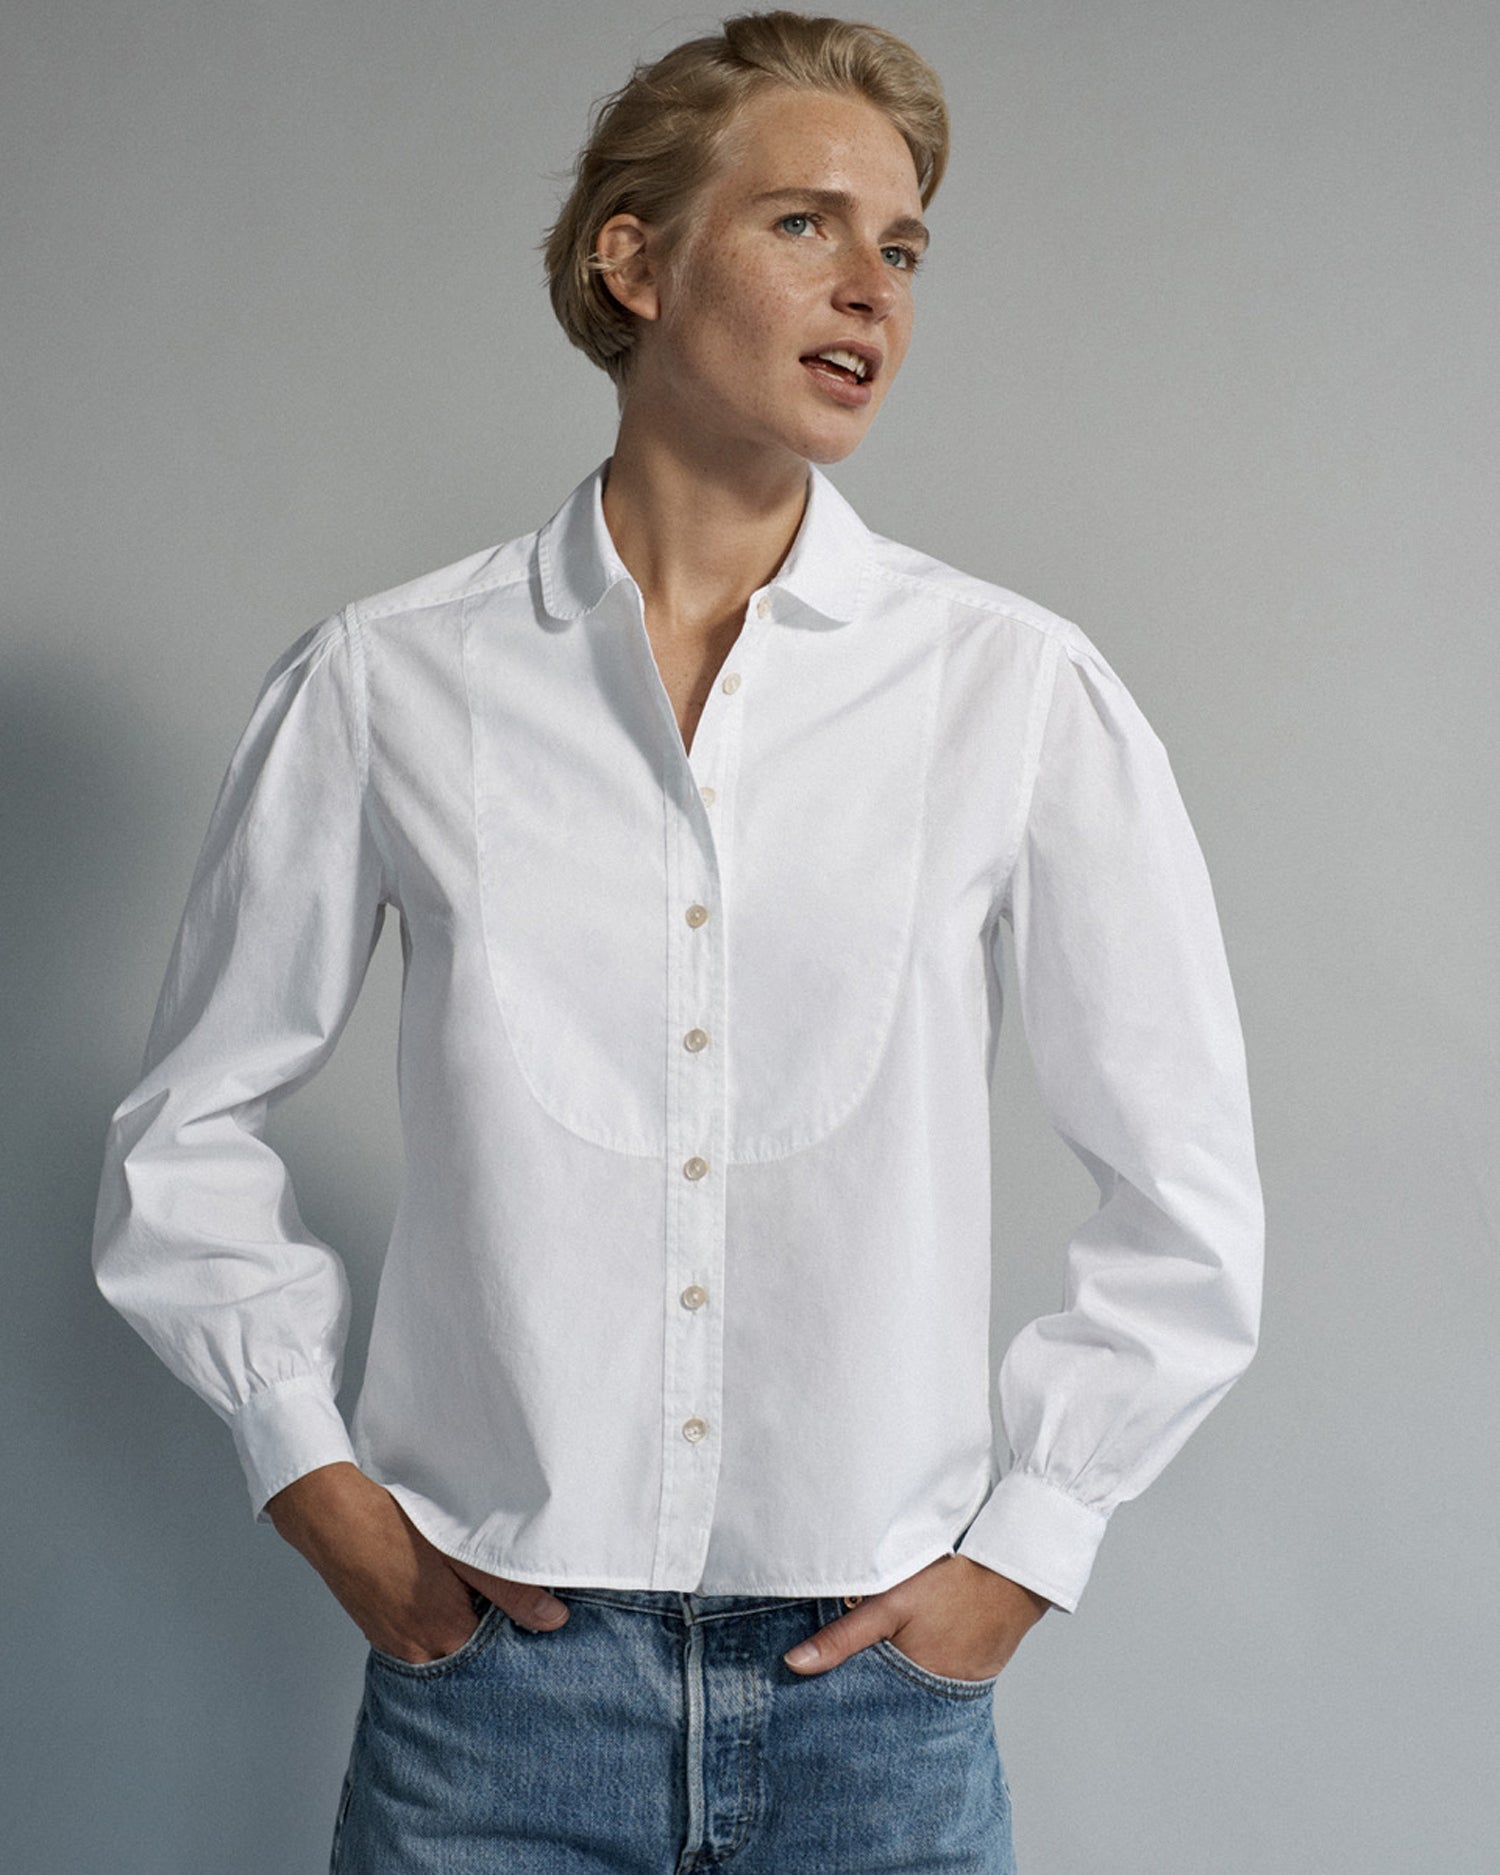 Woman standing and wearing a long sleeve button-down blouse and jeans. Blouse is white cotton and menswear inspired.